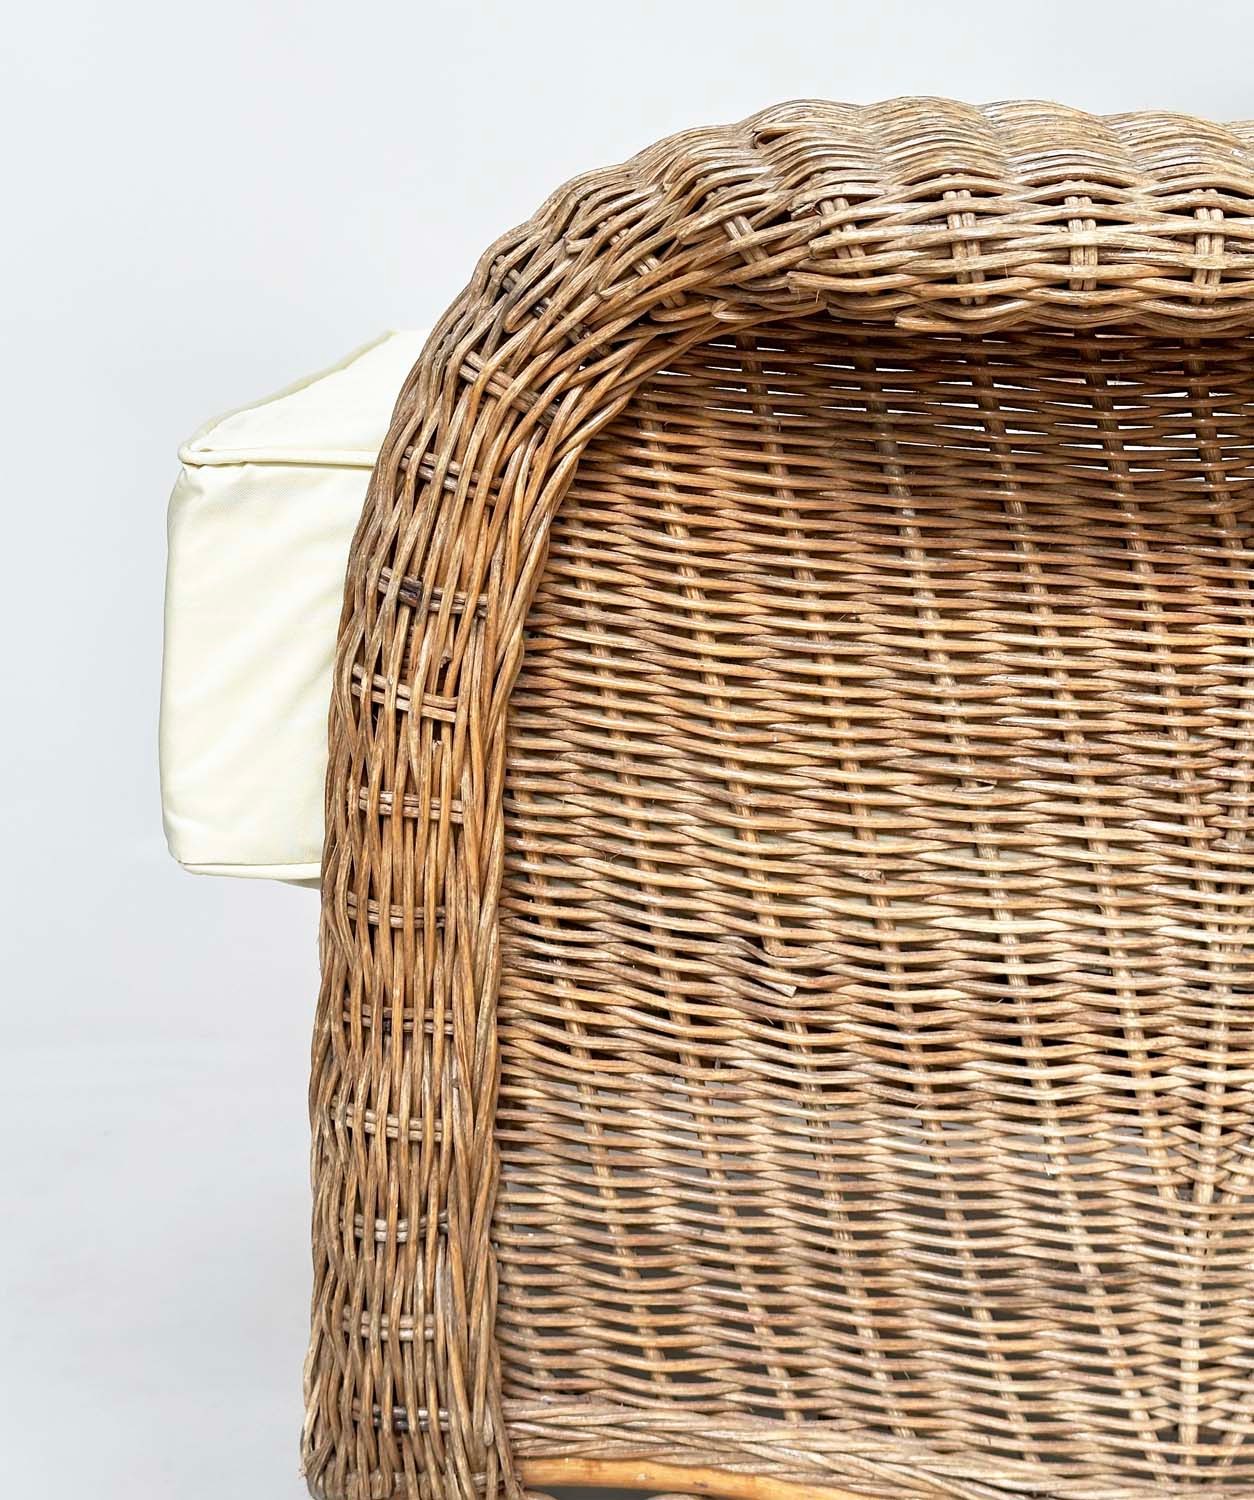 CONSERVATORY ARMCHAIR, mid 20th century rattan framed and cane woven with shaped back and - Image 7 of 13